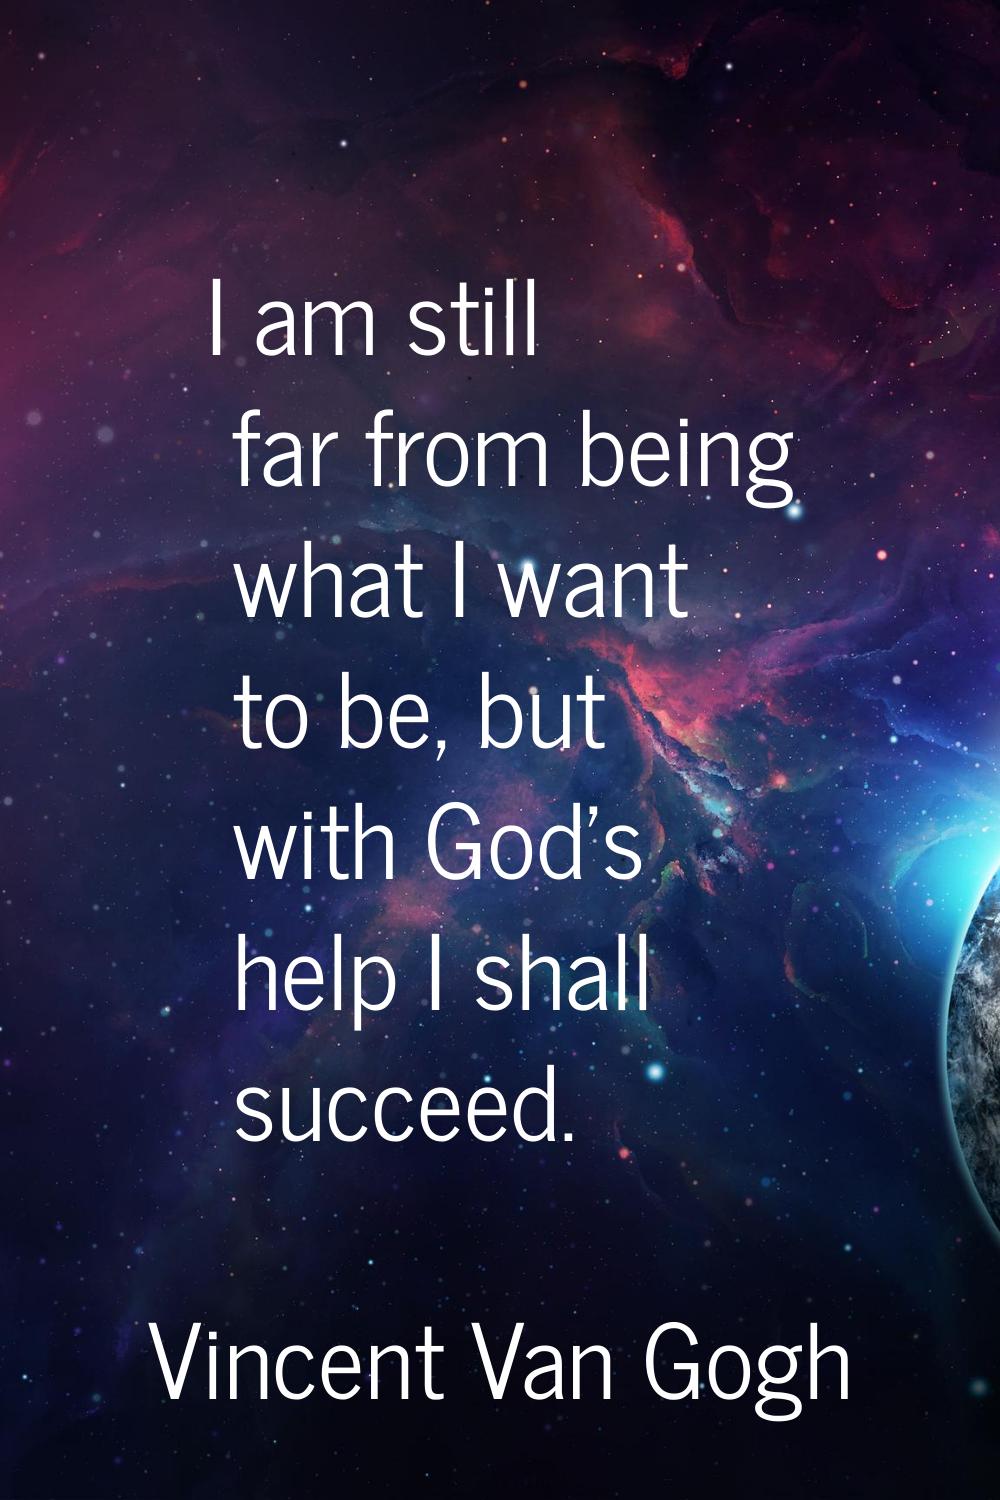 I am still far from being what I want to be, but with God's help I shall succeed.